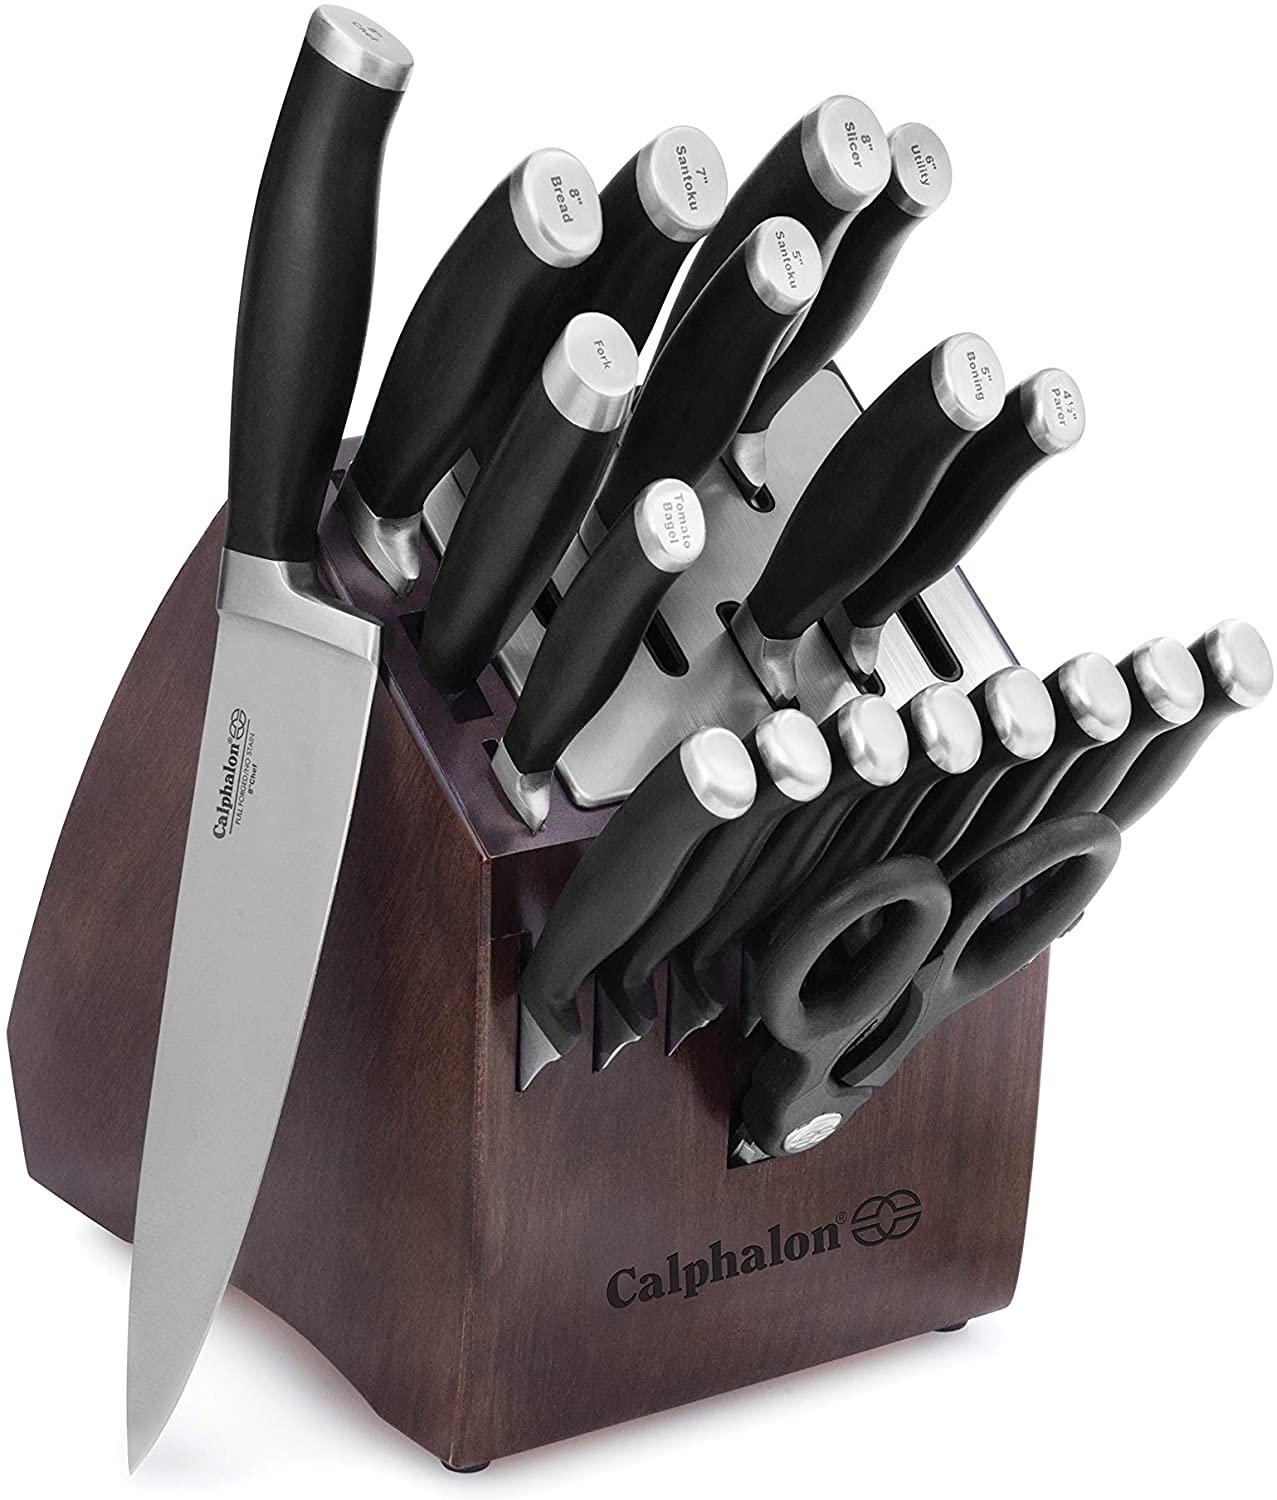 Best Calphalon Steak Knives for sale in Germantown, Tennessee for 2023